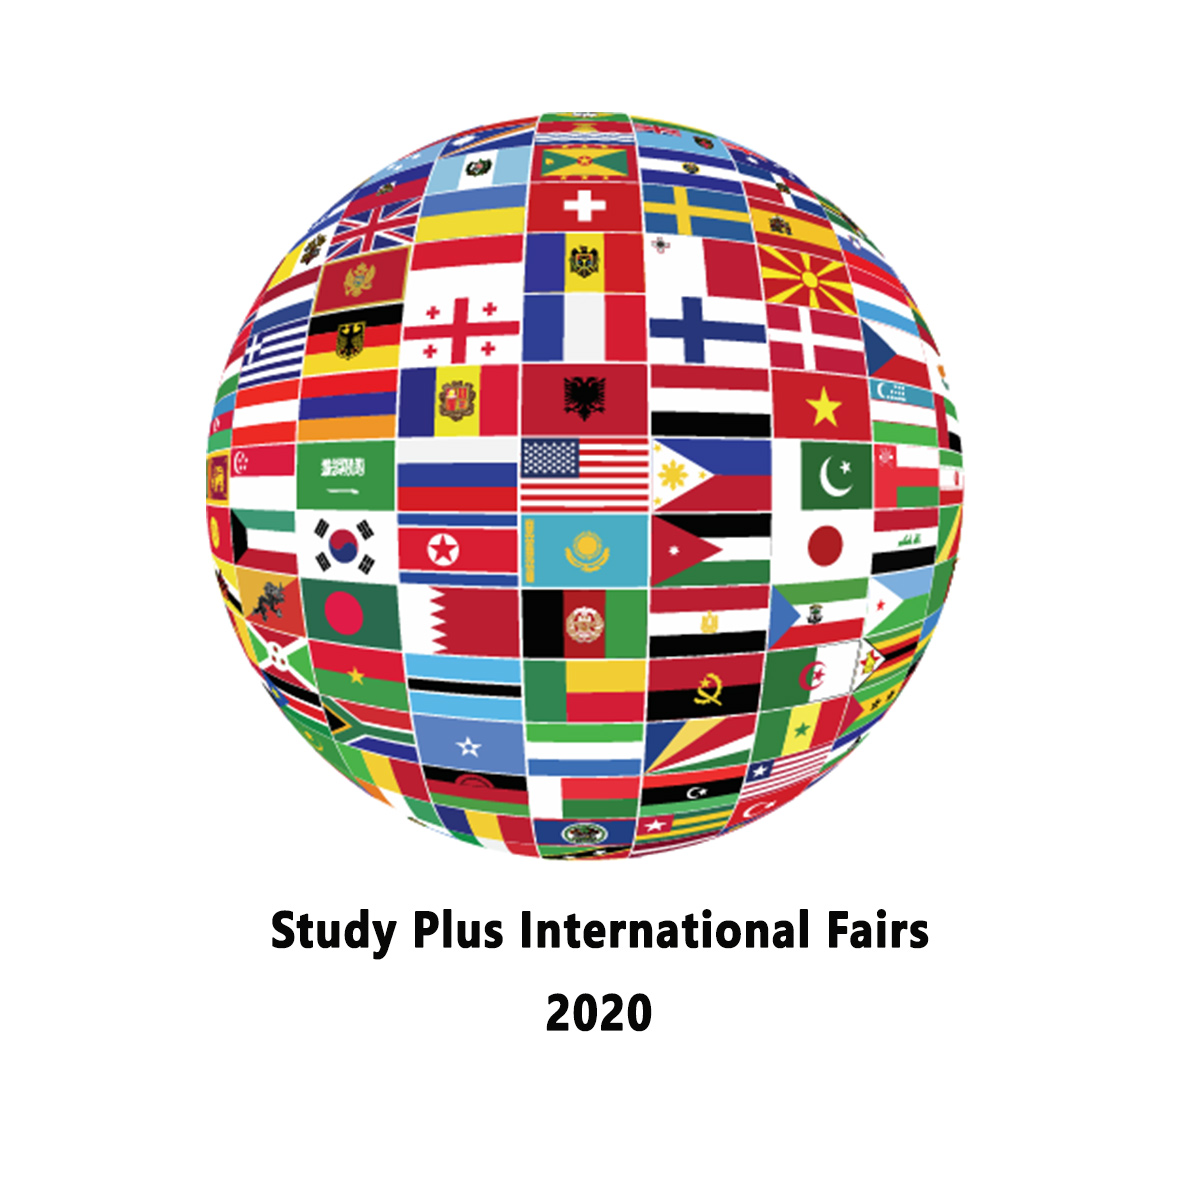 Study Plus International Fairs/ Seminars and Scholarships around Southeast Asia and South Asia in 2020